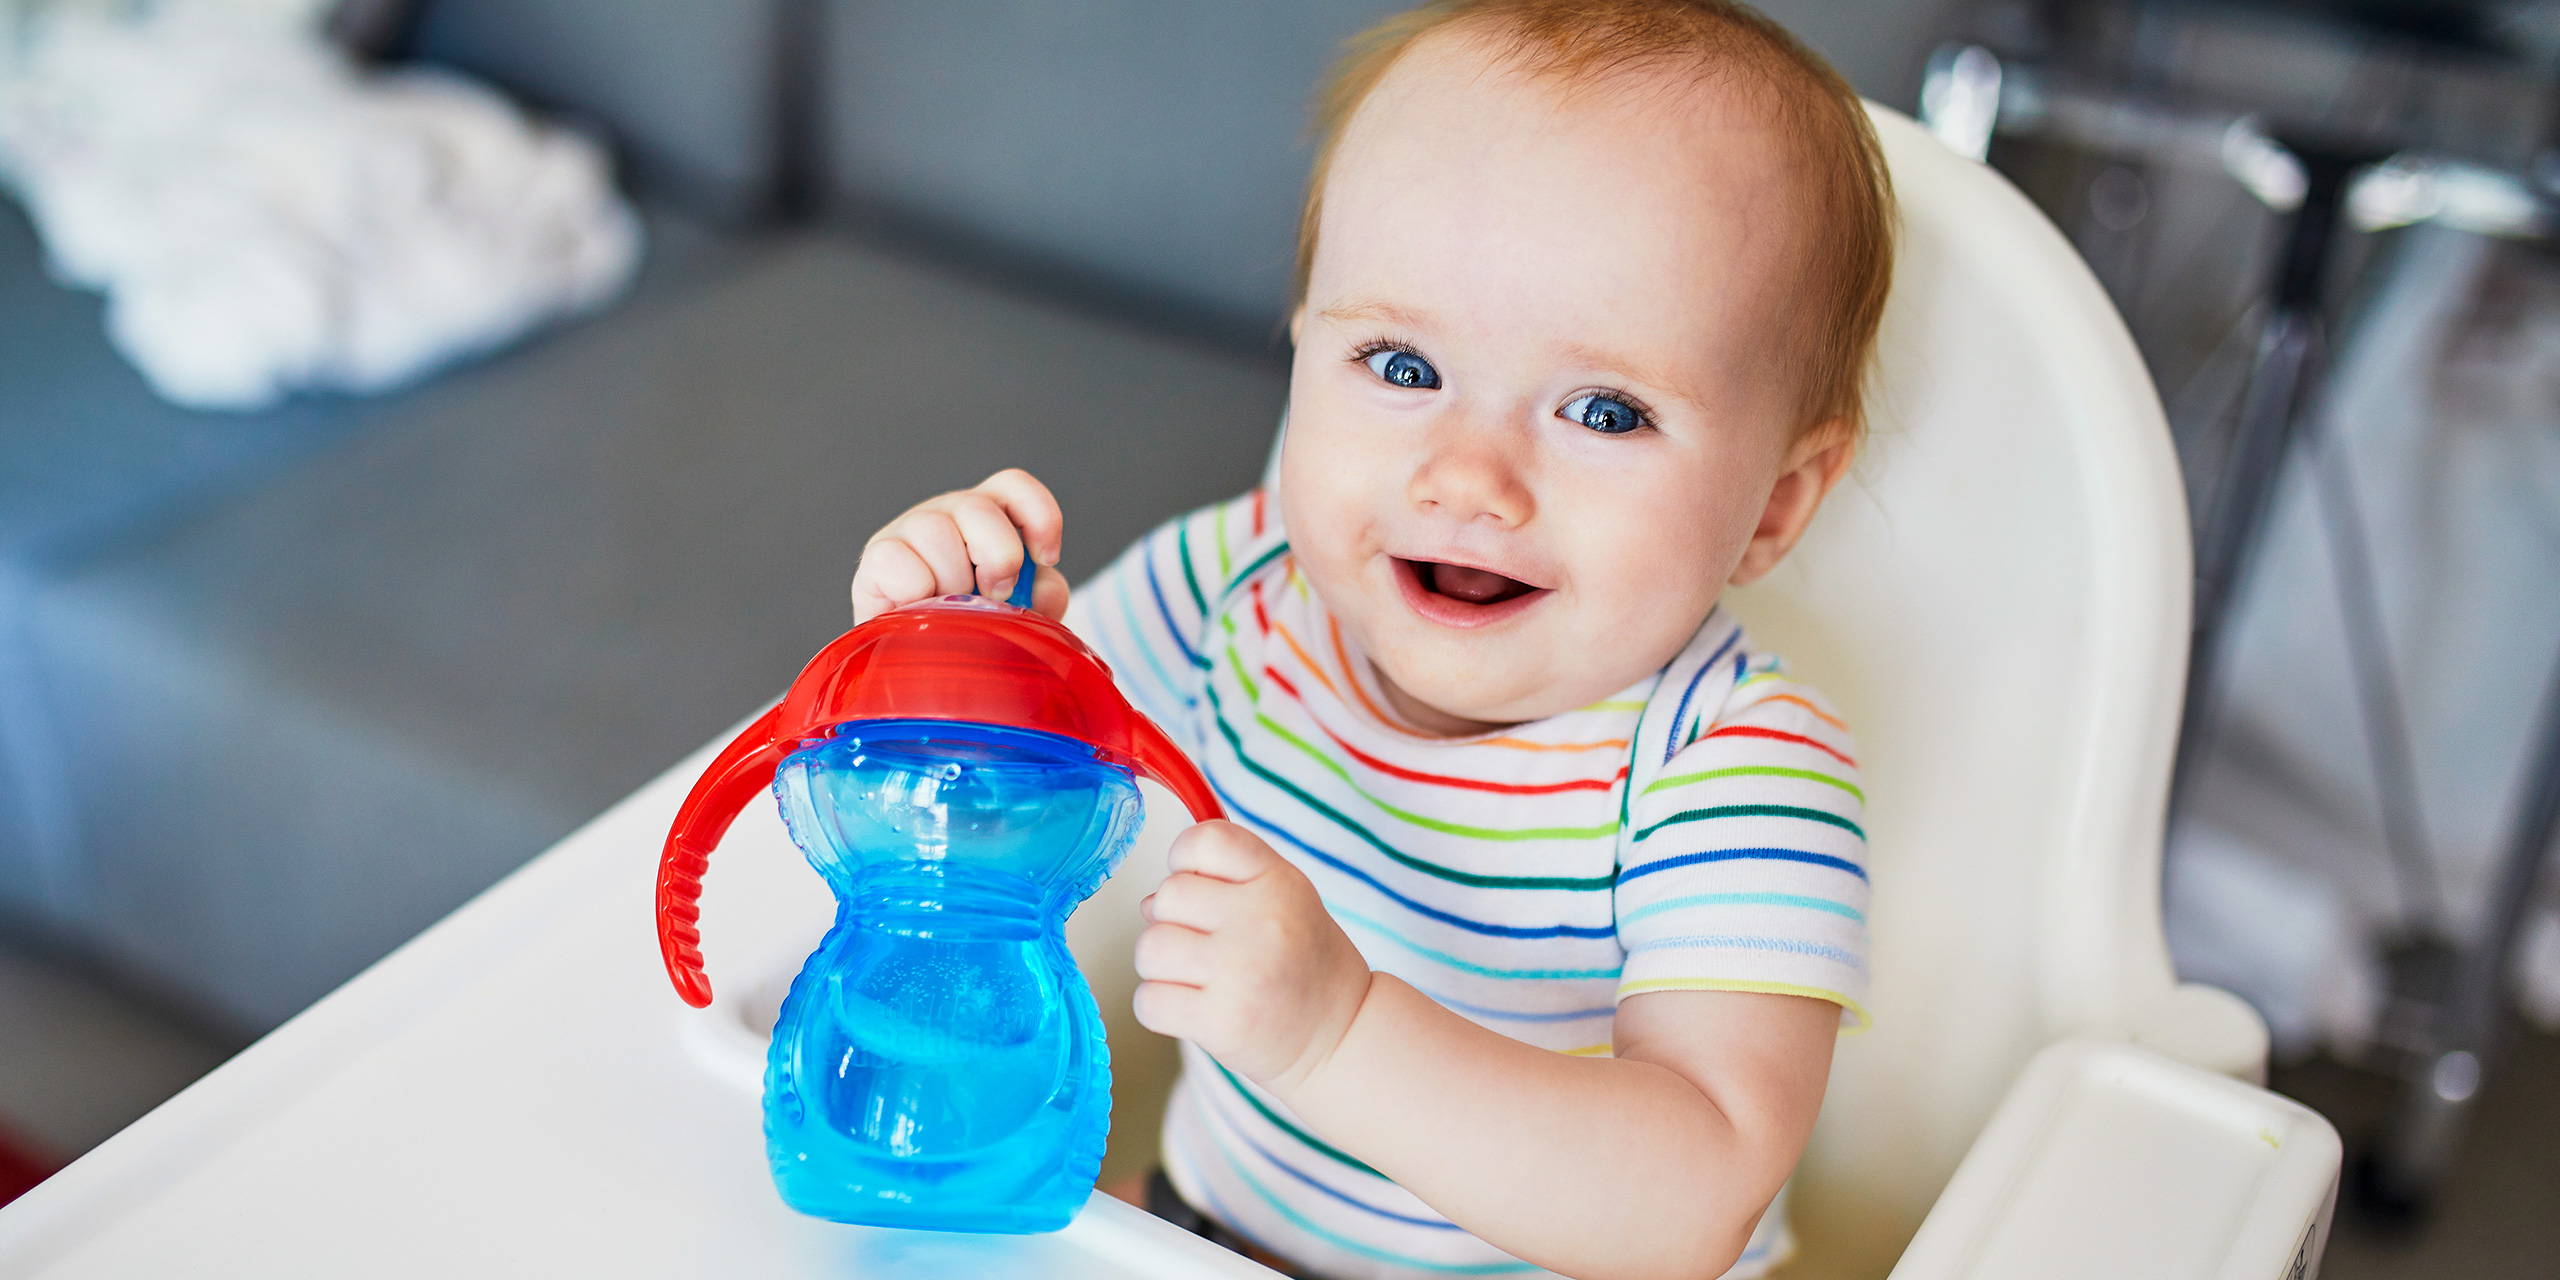 infant sippy cup instead of bottle